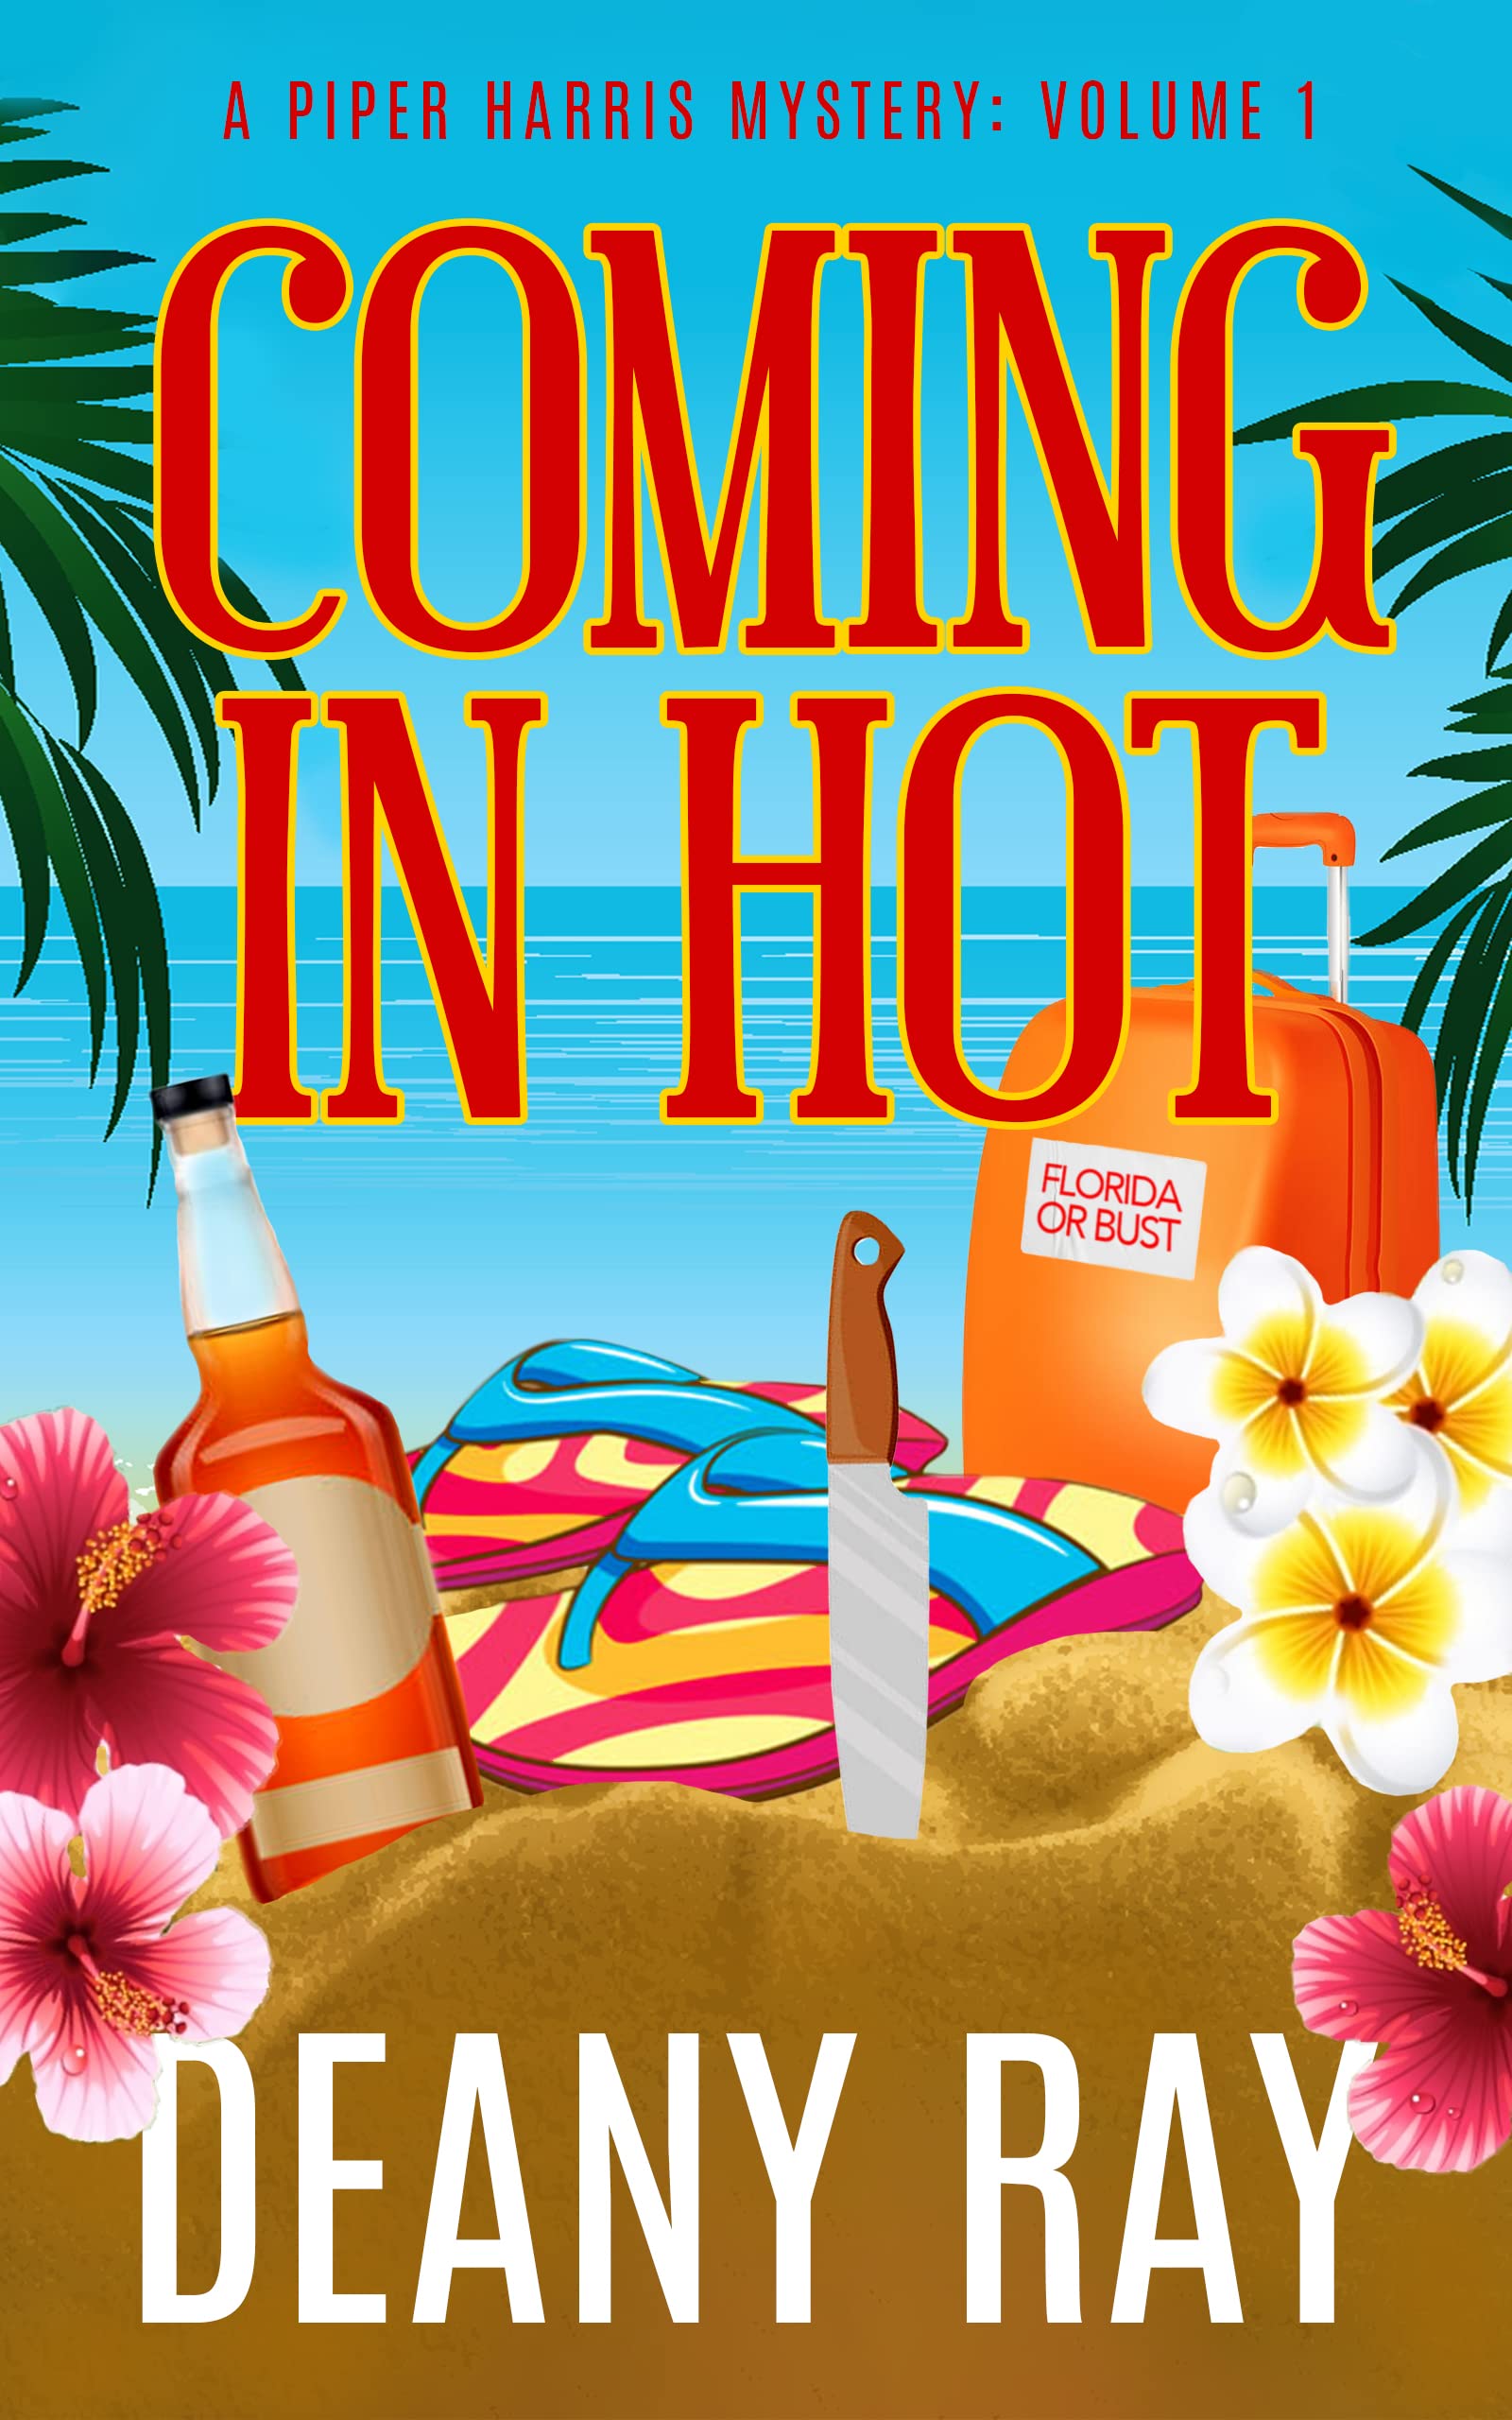 Coming in Hot (A Piper Harris Mystery, Volume 1)